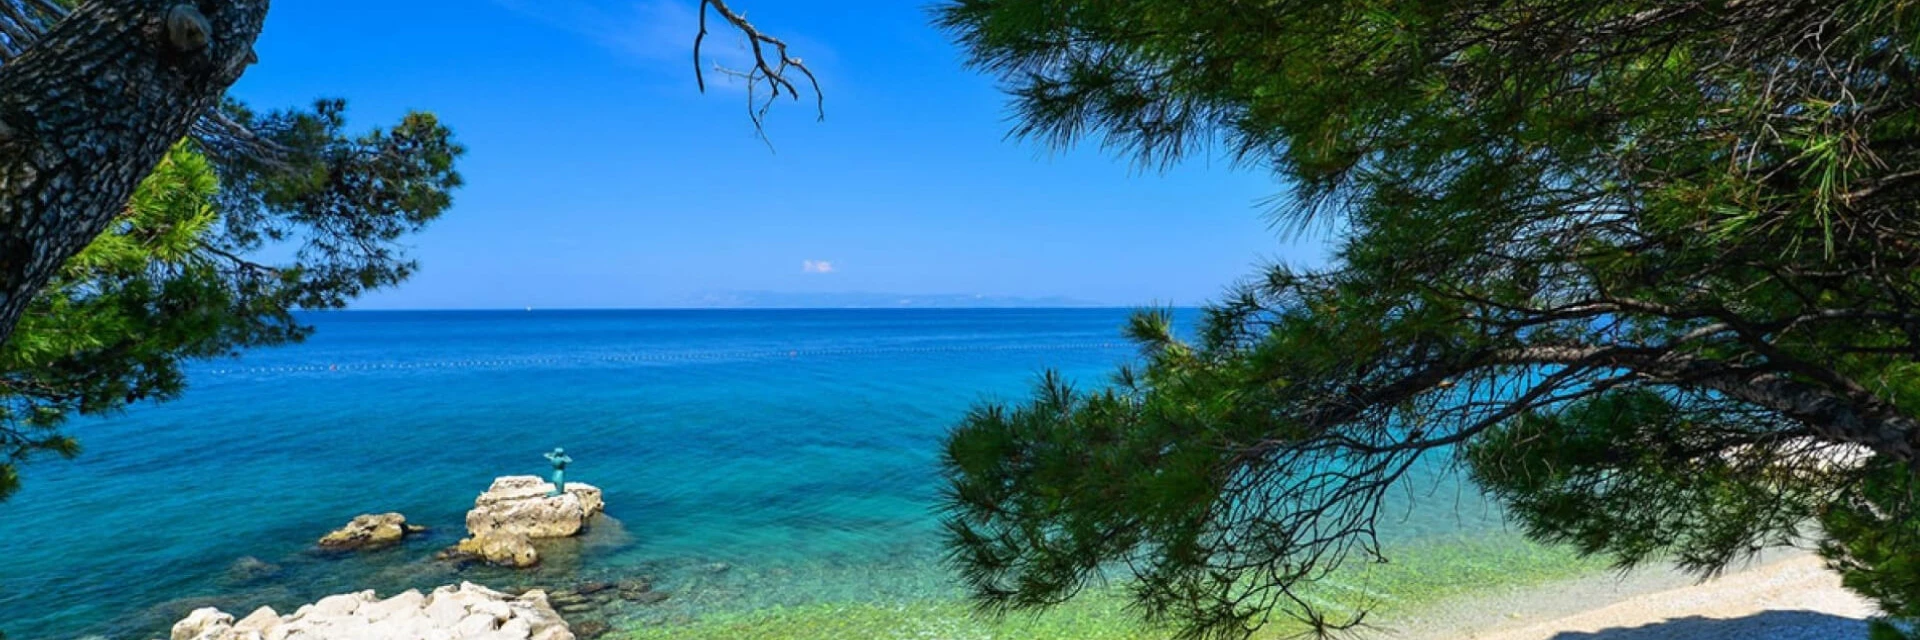 Come to Podgora and check out the best attractions in Makarska Riviera